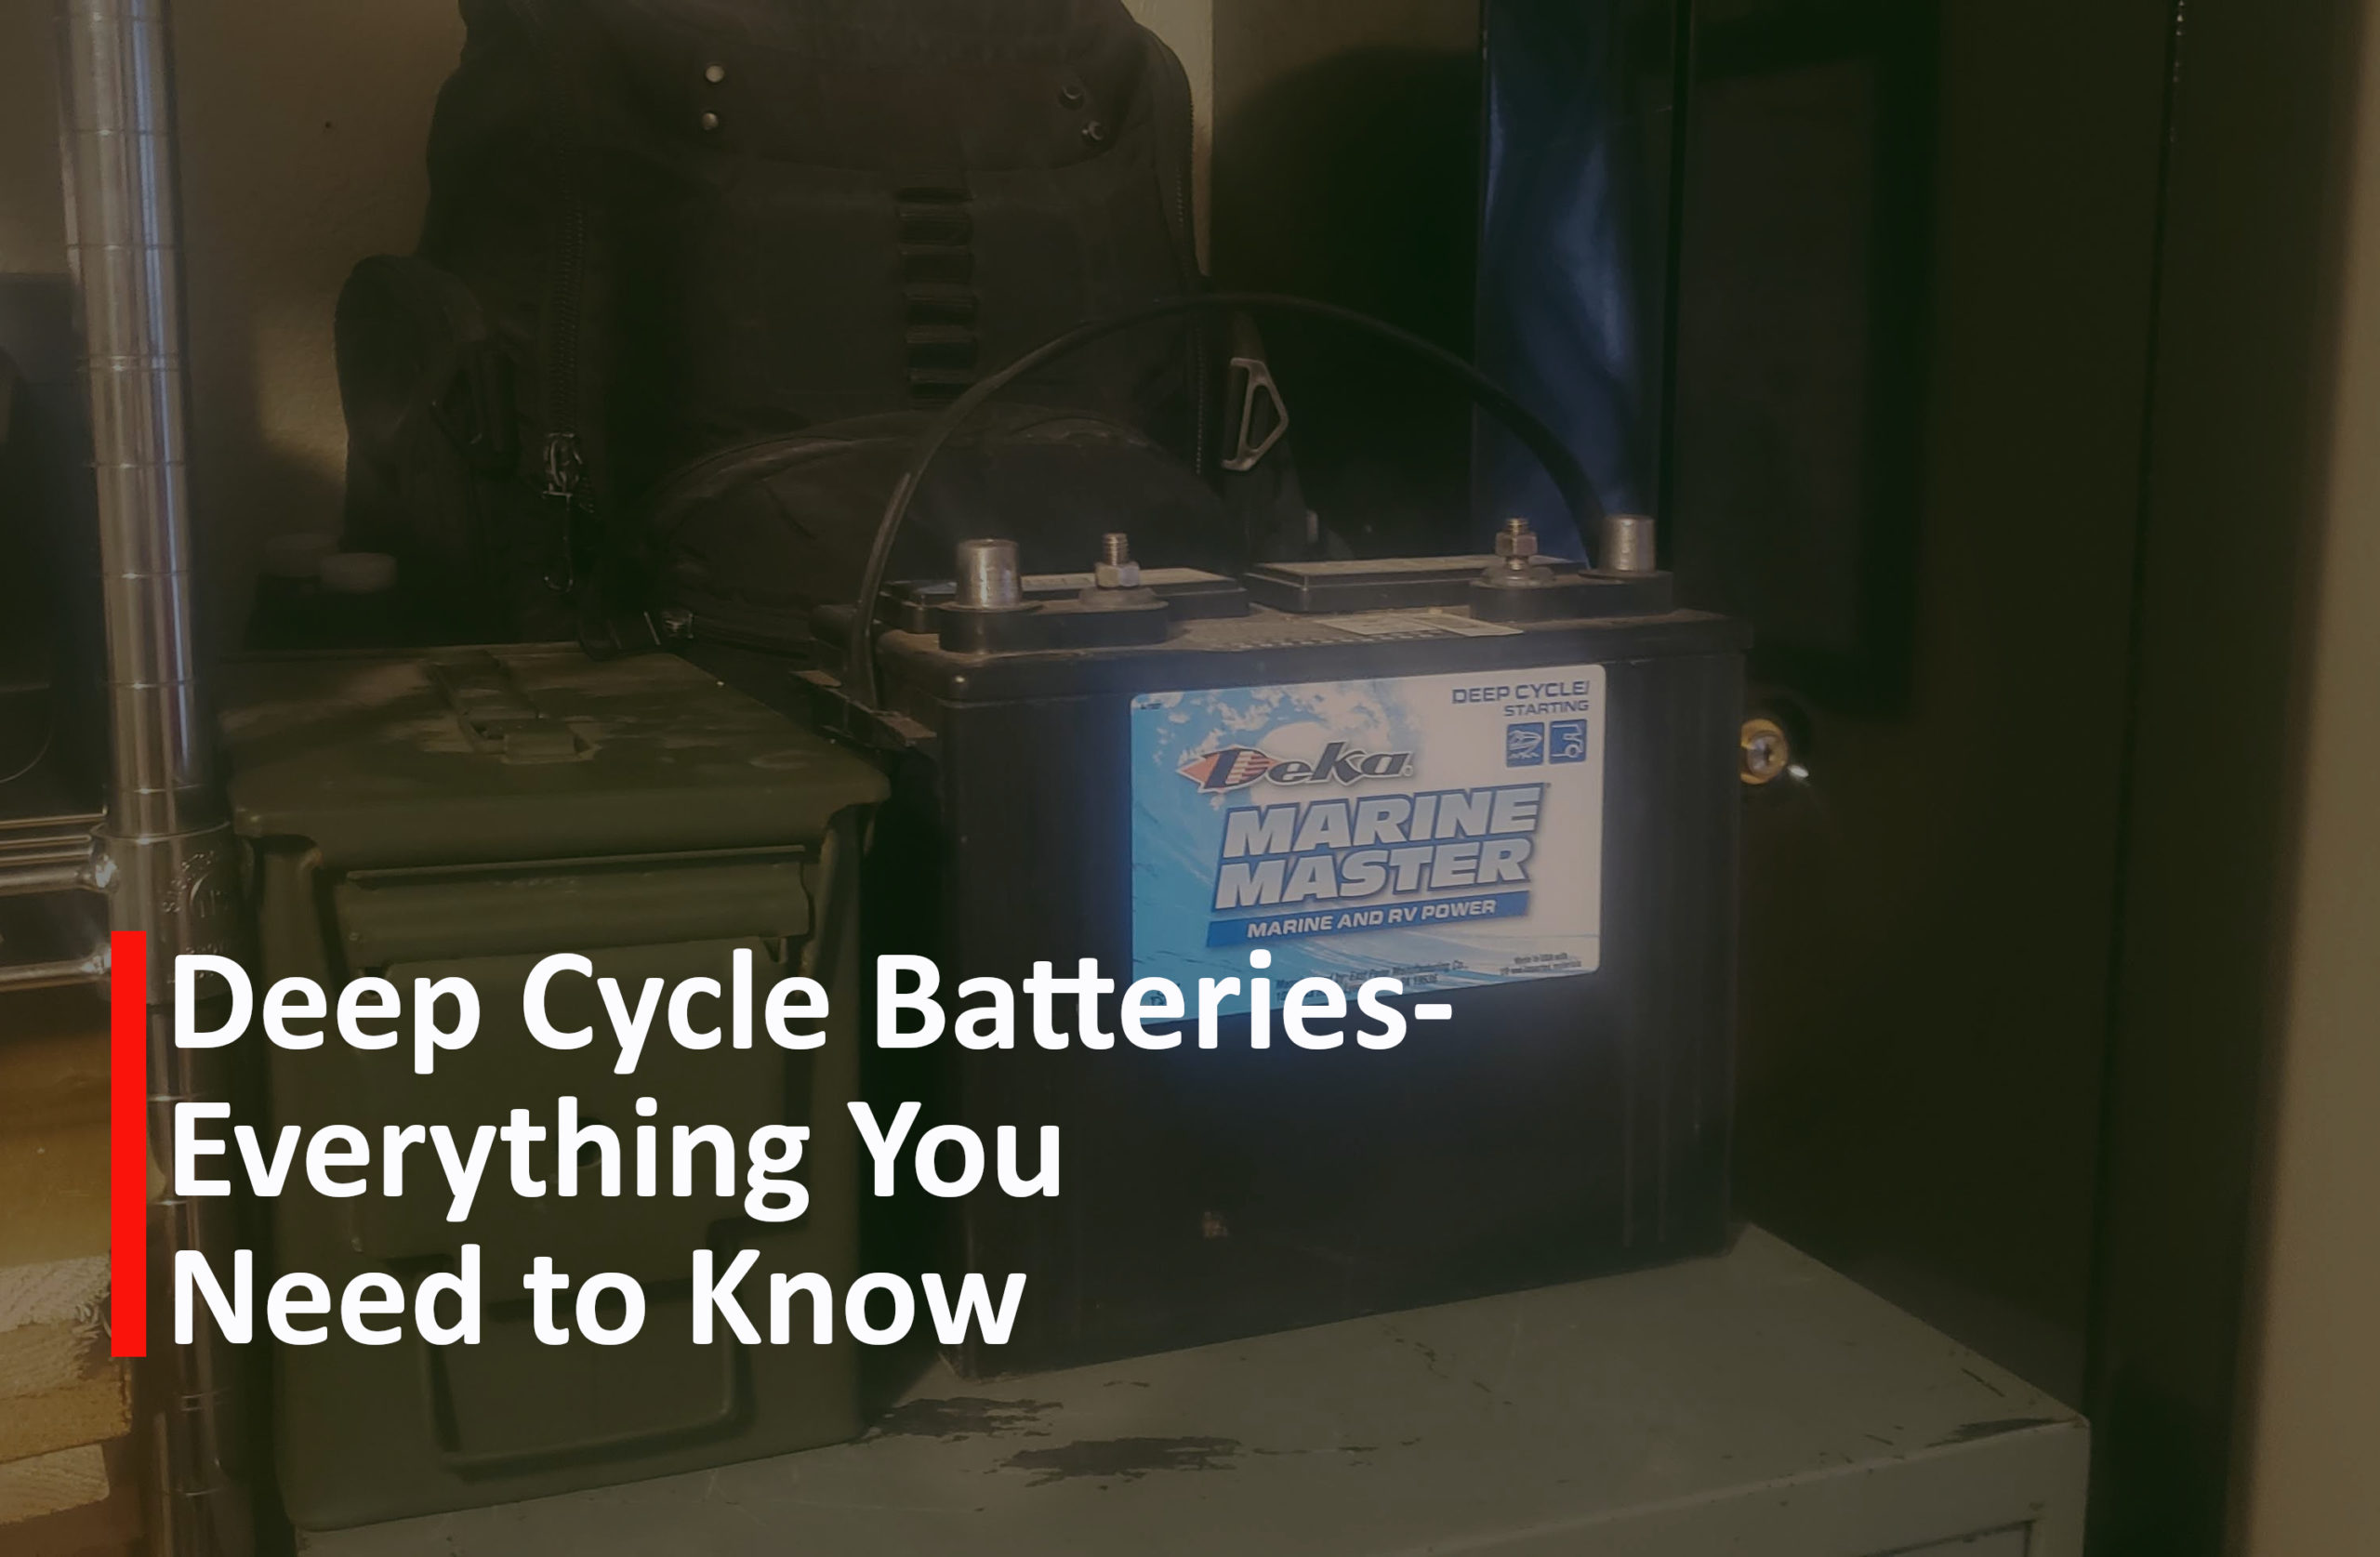 Deep Cycle Batteries- Everything You Need to Know